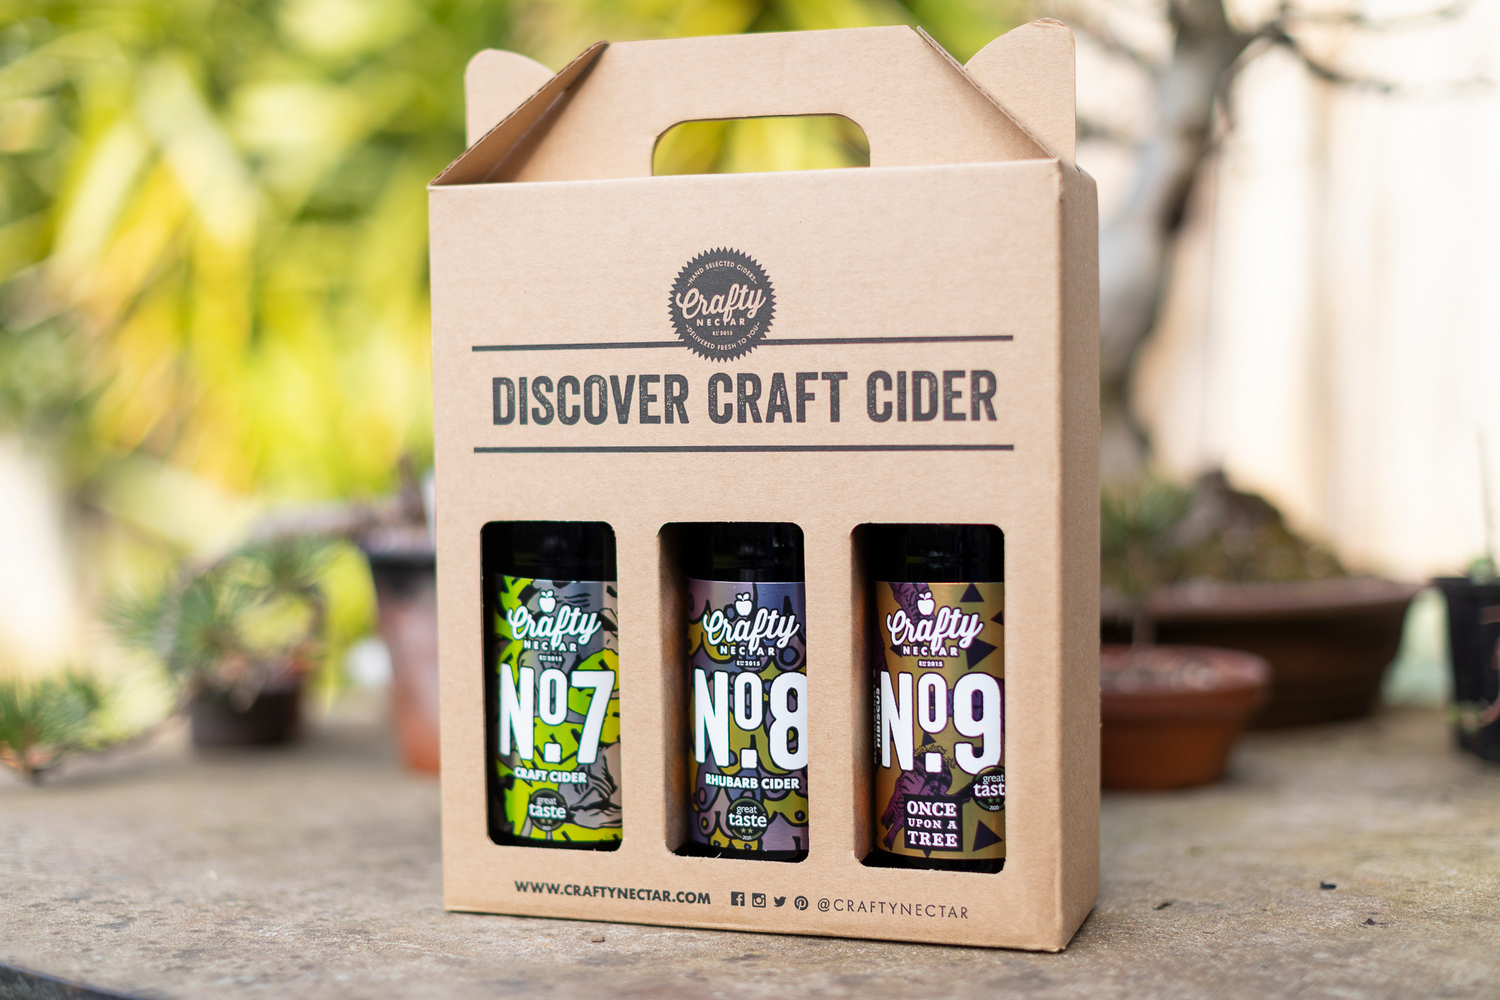 Crafty Nectar ciders get showcase in Co-Op stores thumbnail